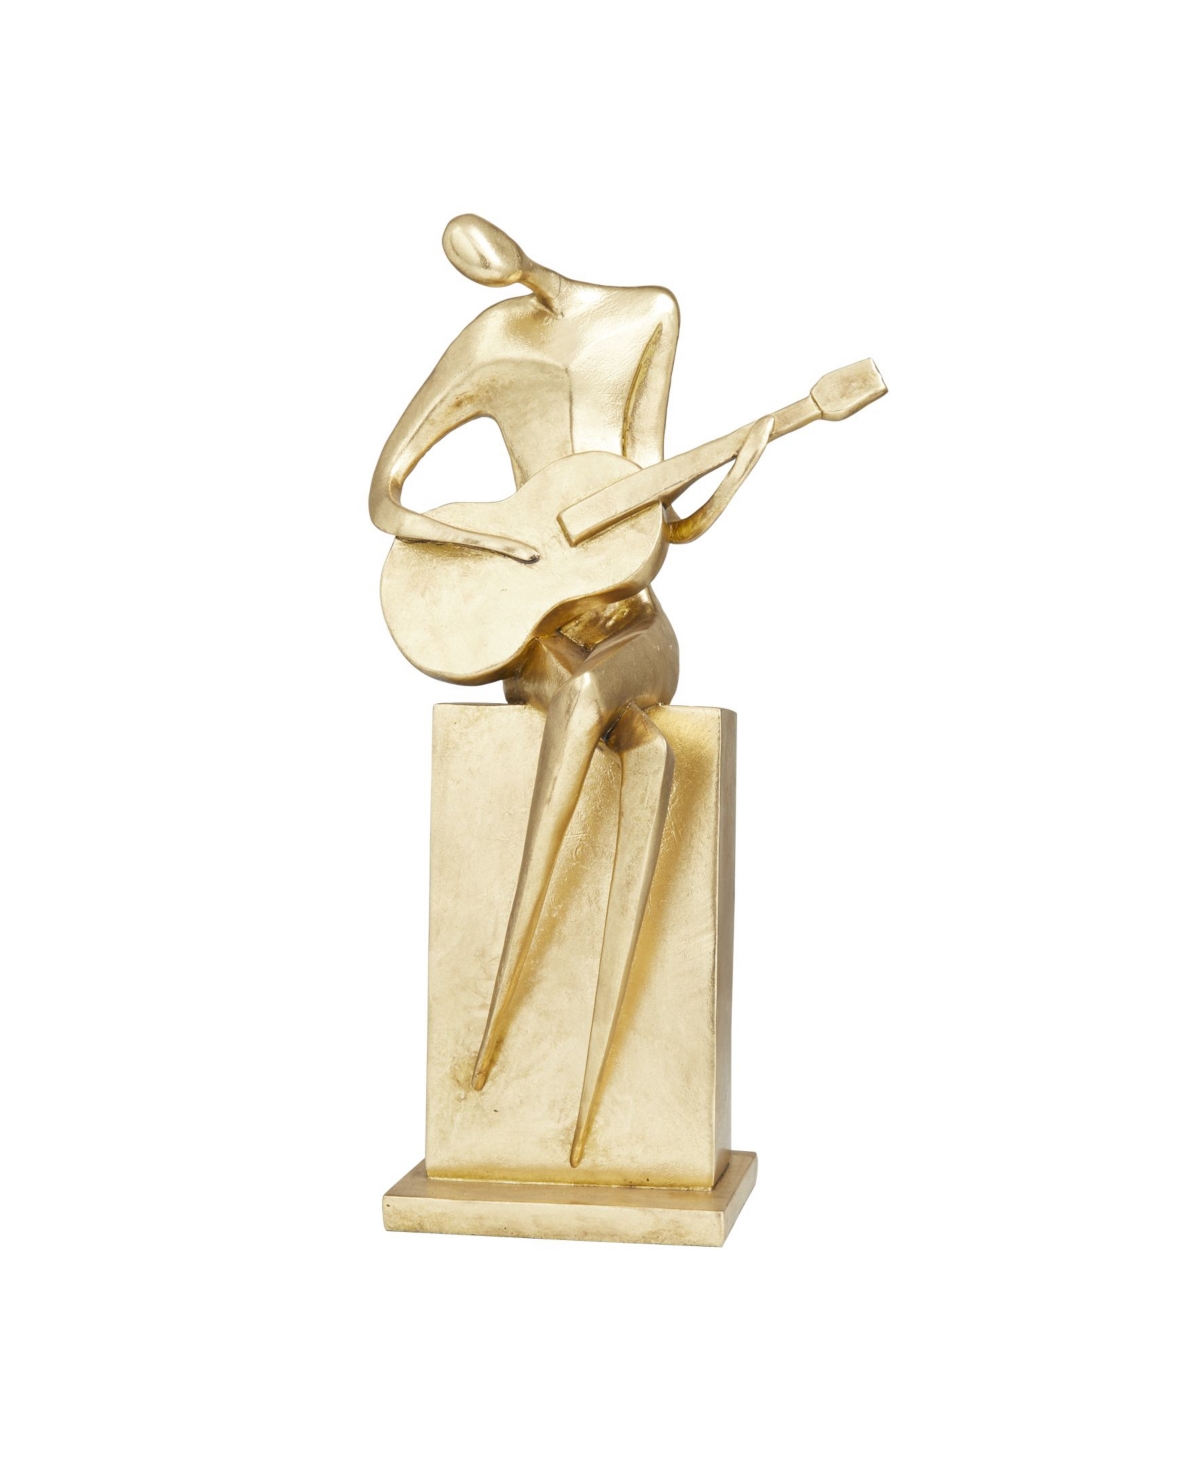 Rosemary Lane Contemporary Sculpture, 17" X 9" In Gold-tone